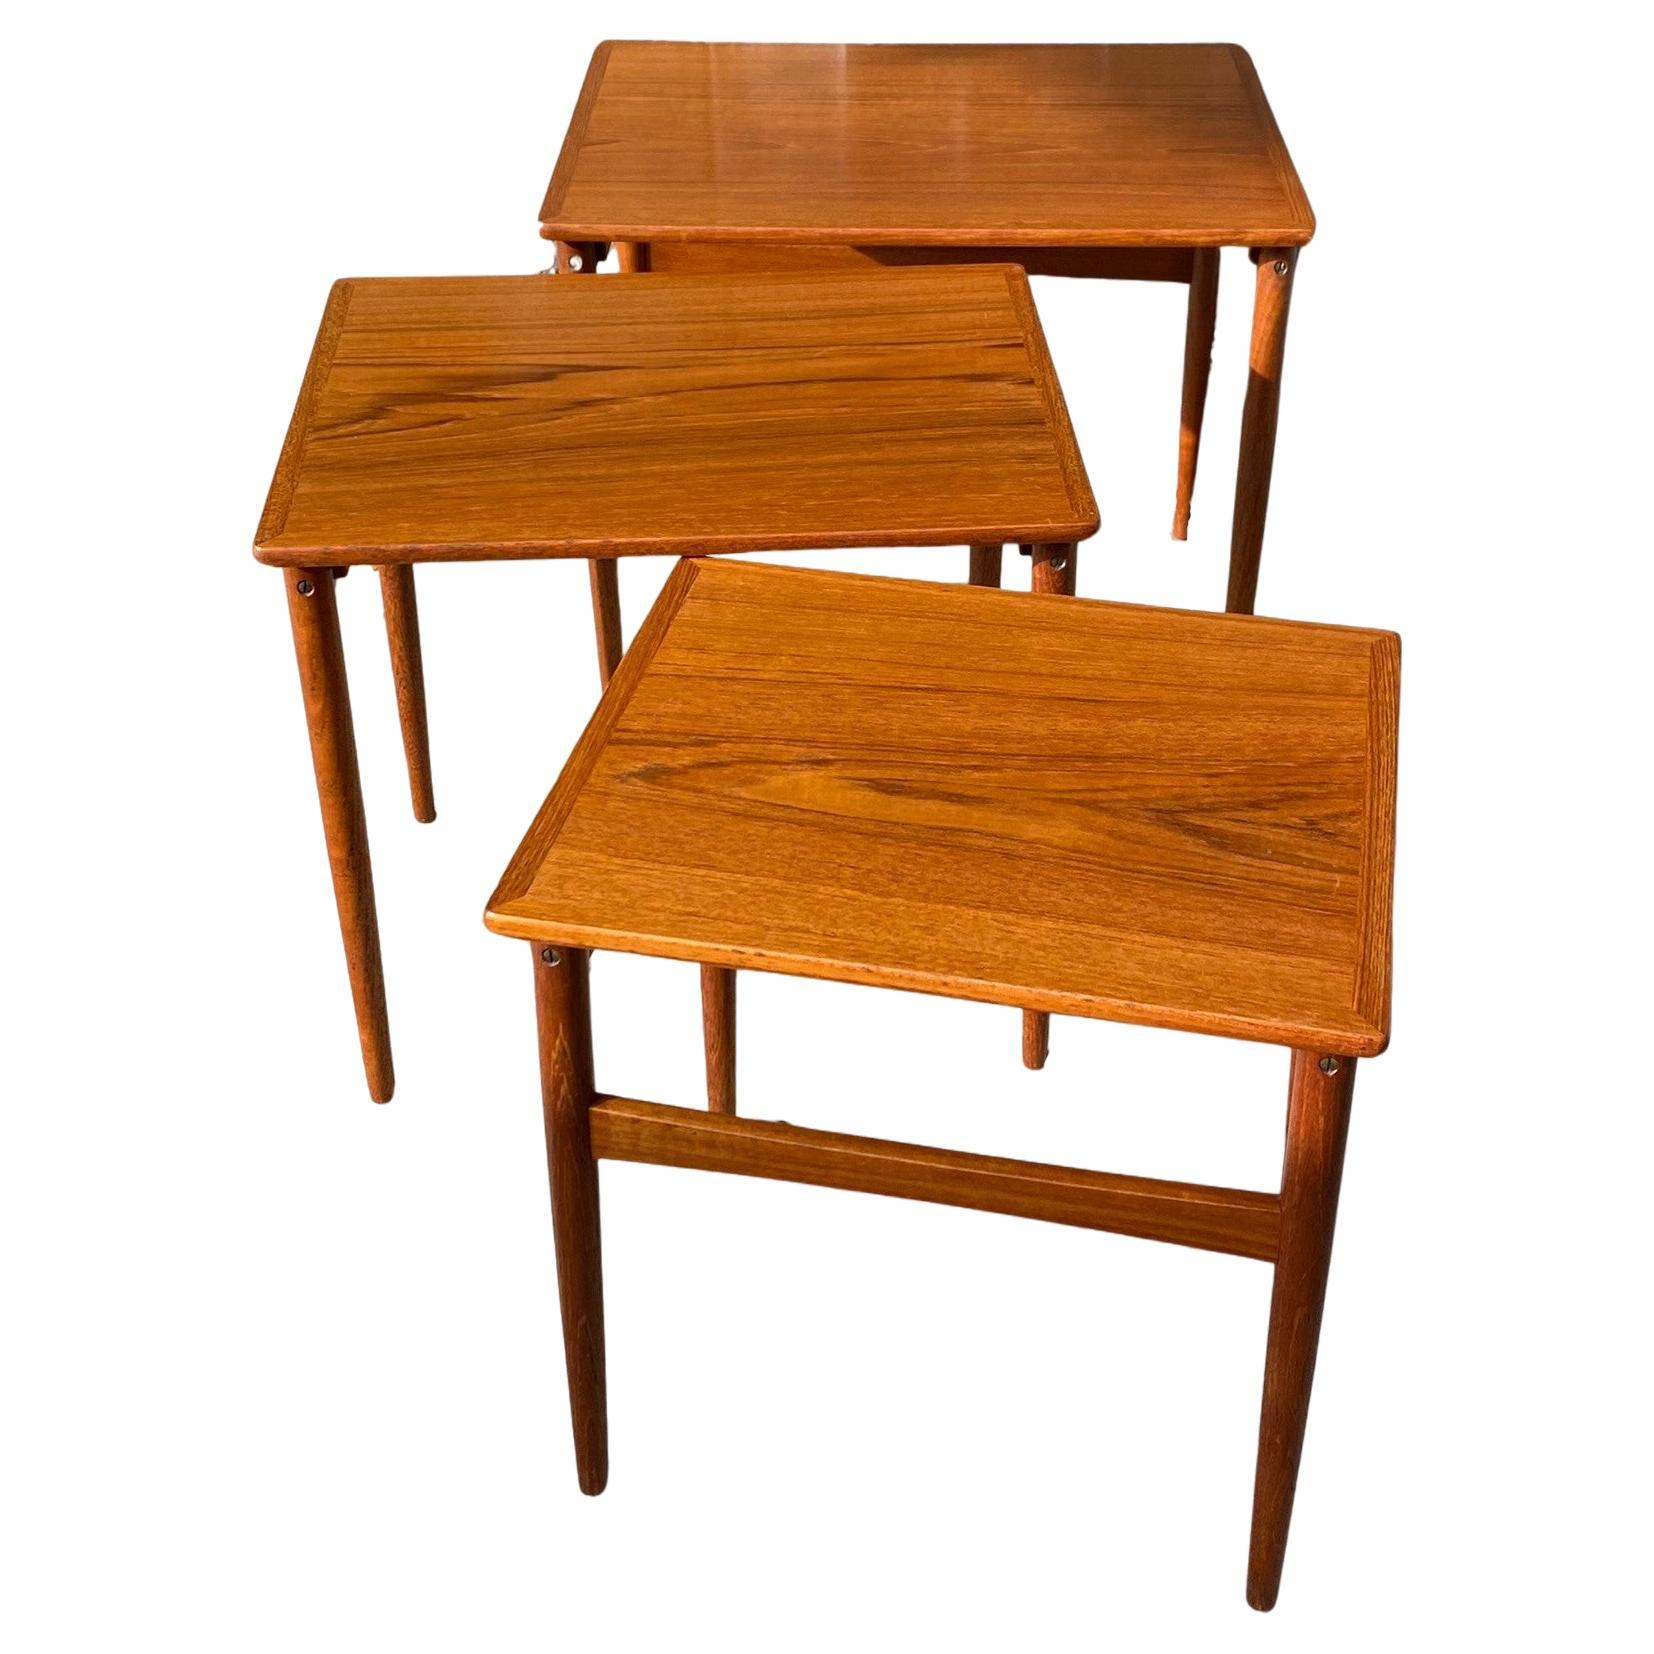 Mid-Century Teak Nest of Tables By Peter Brink for BR Gelsted, Denmark, C. 1960s